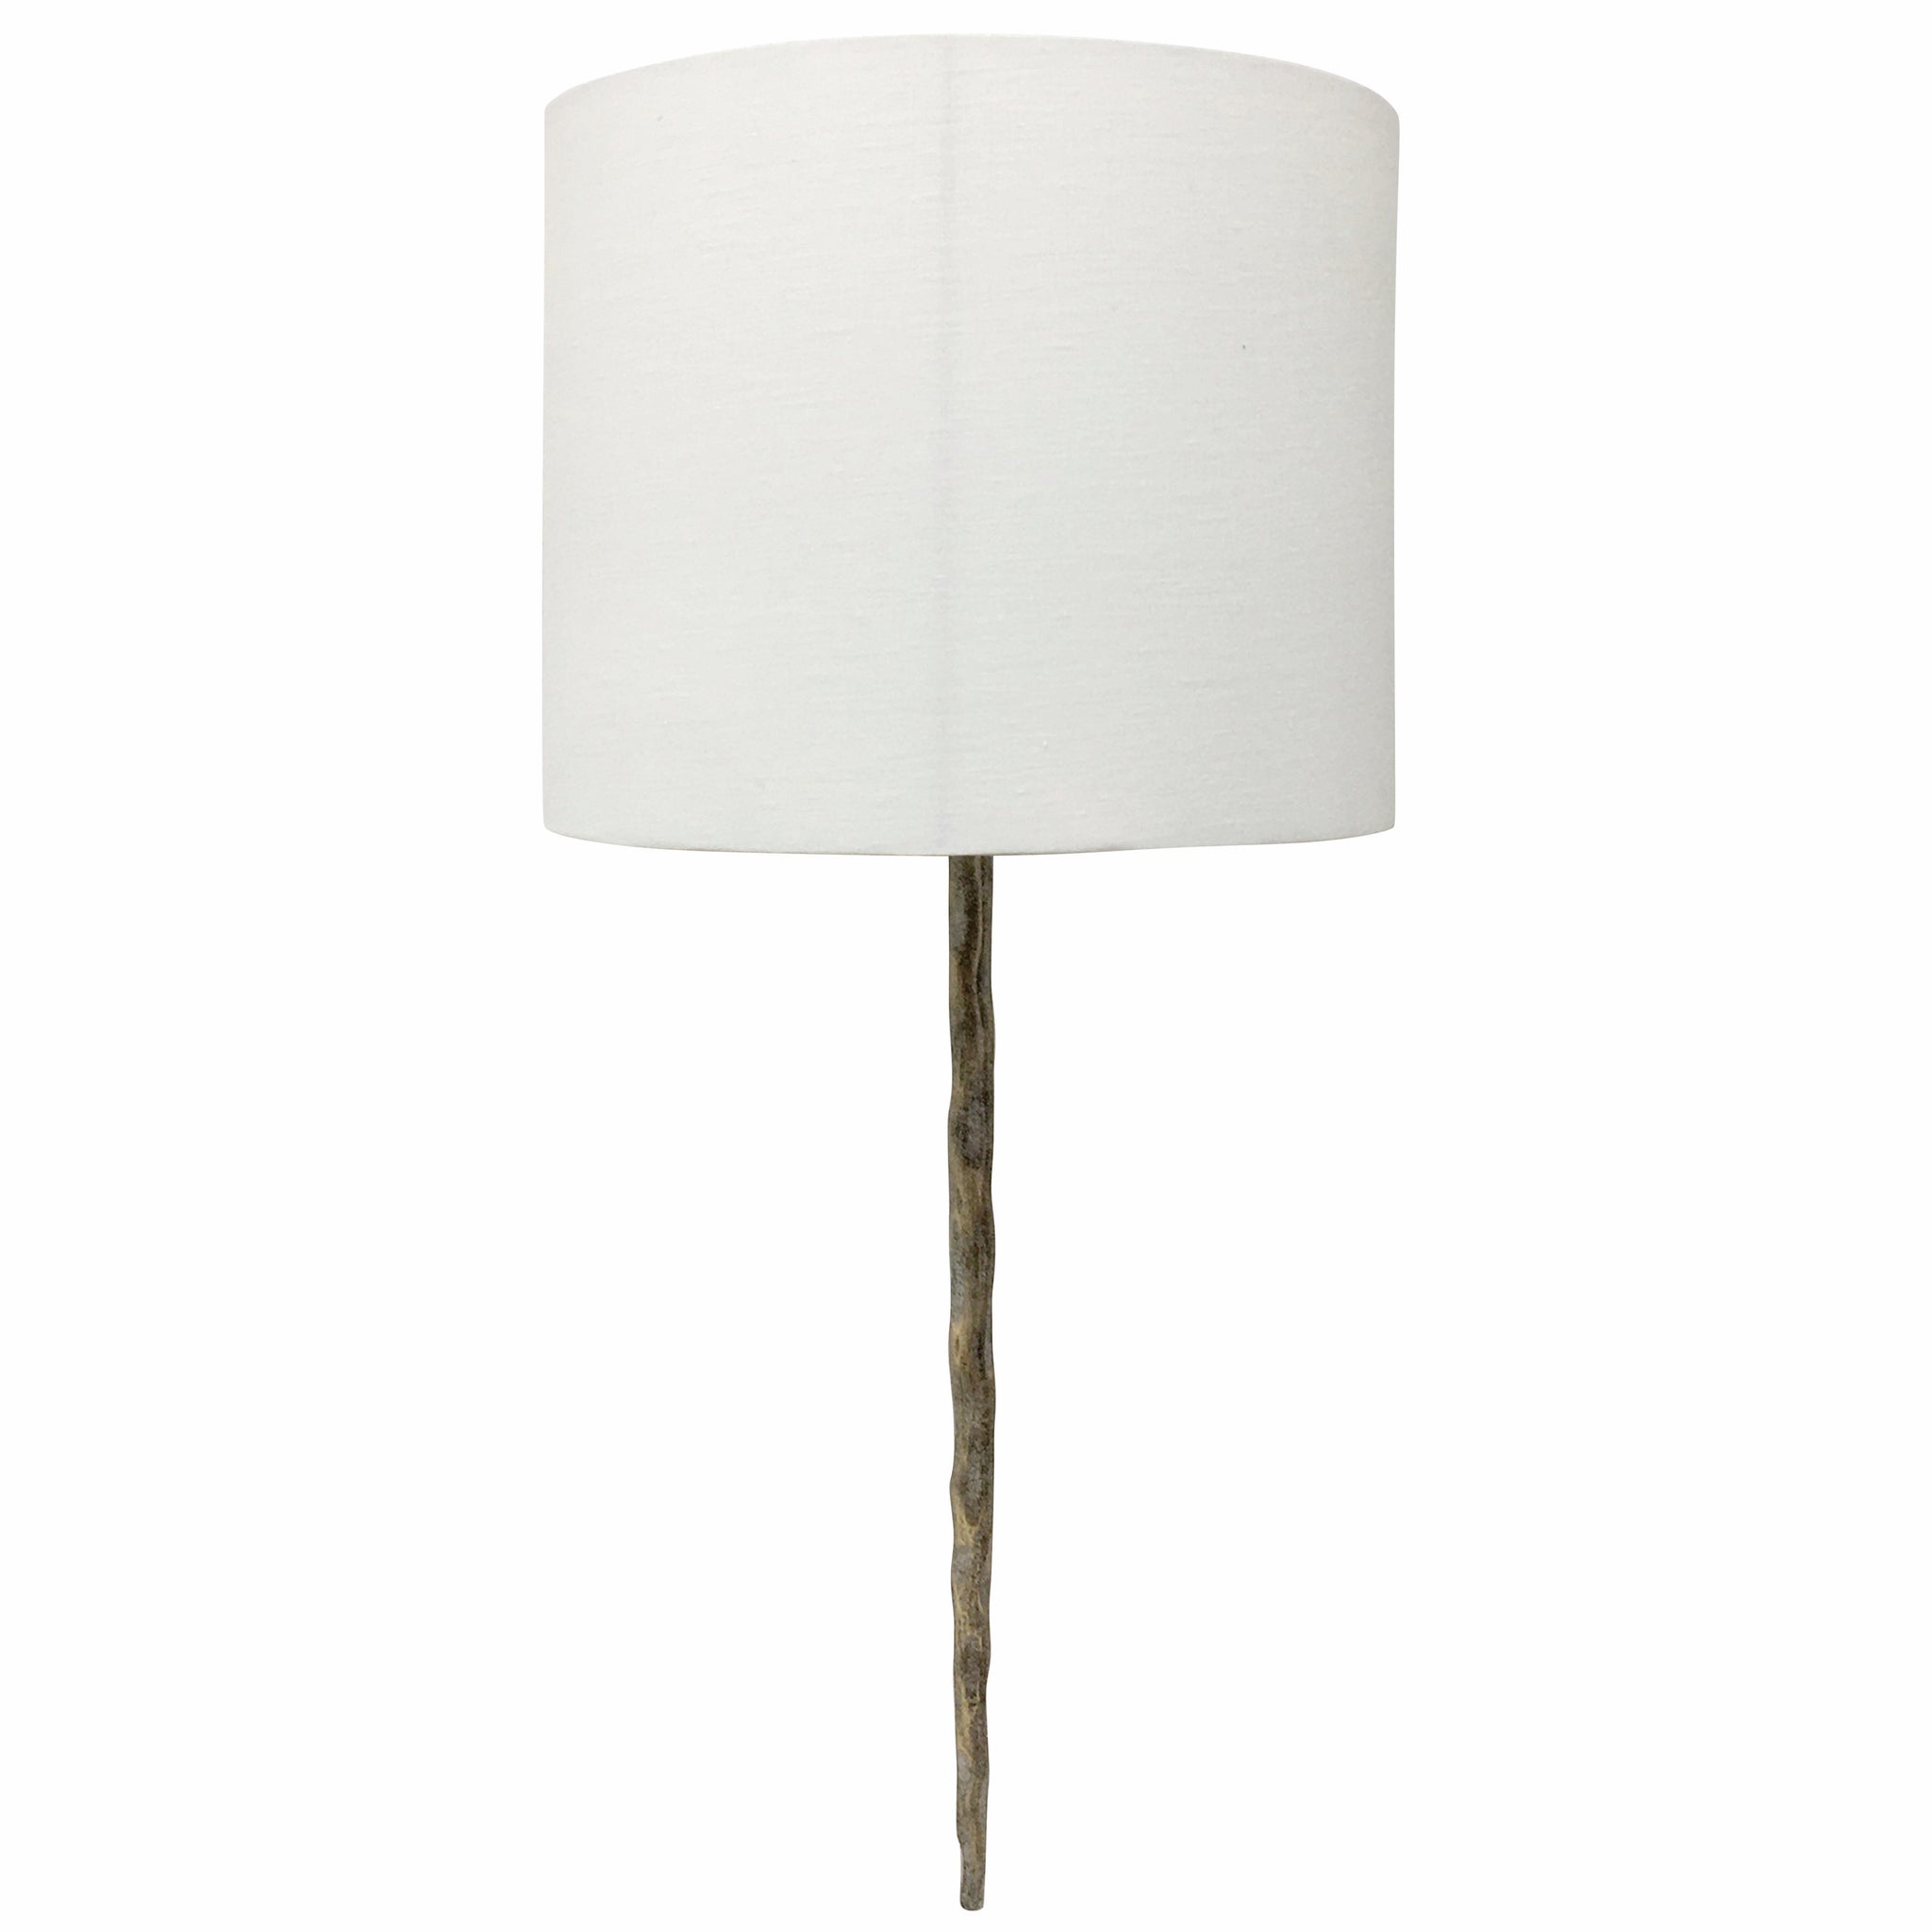 Dalton Wall Light with Shade in Aged Gold